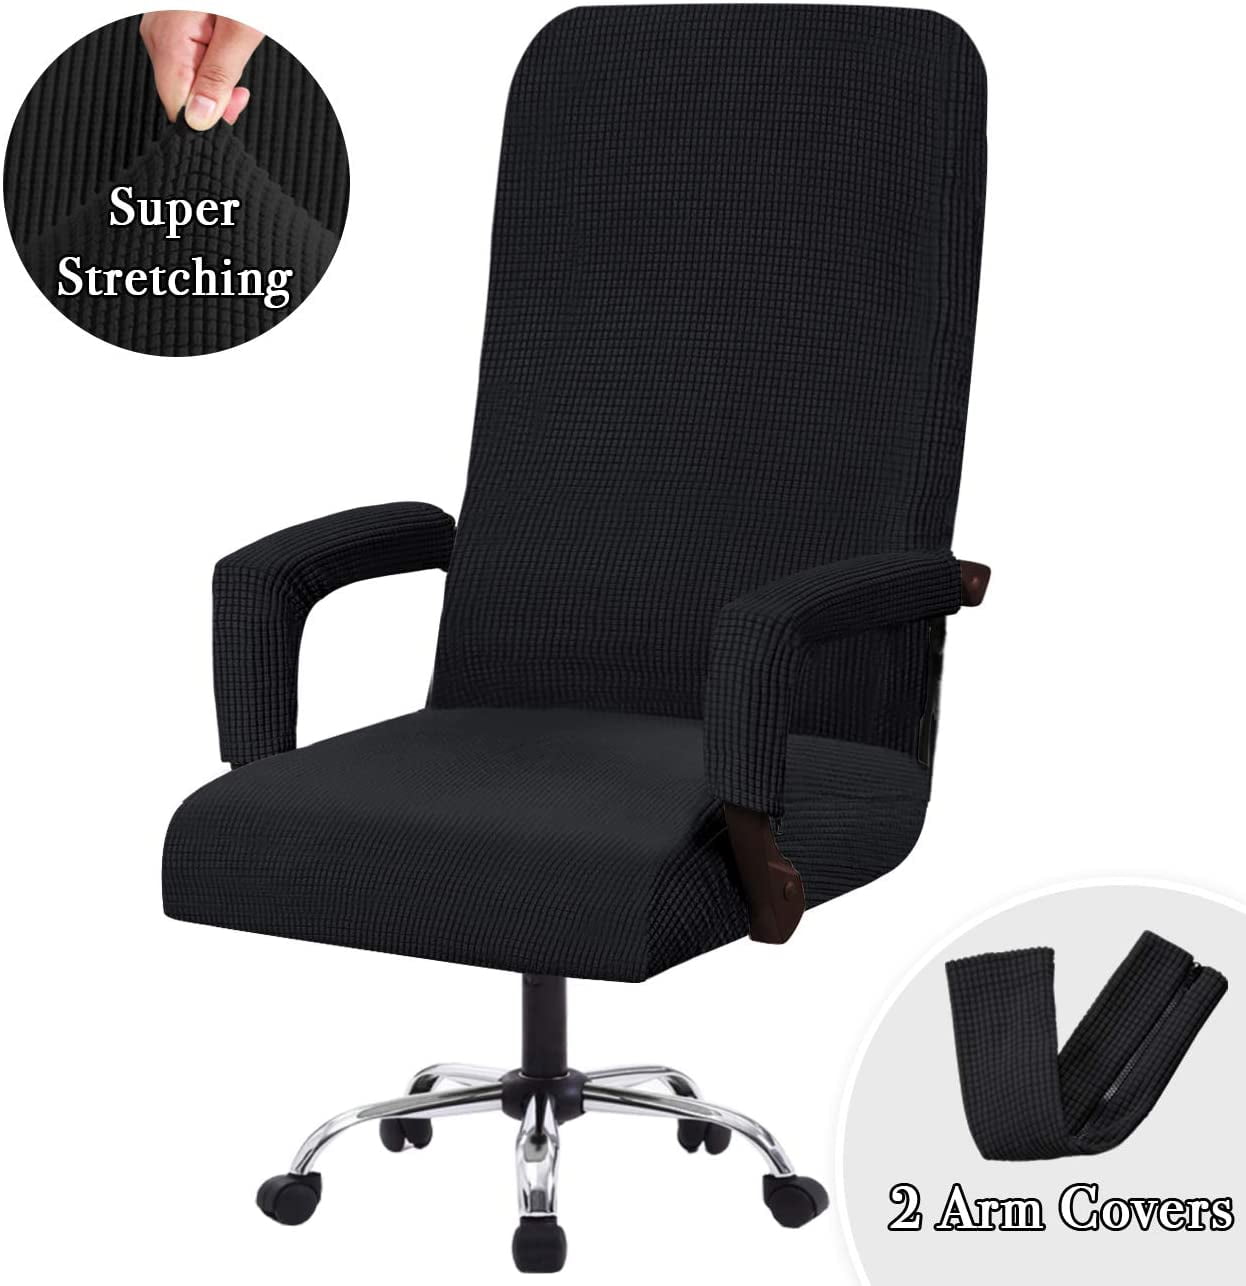 Details about  / Elastic Stretch Arm Chair Seat Cover Office Universal Desk Rotat Seat Covers